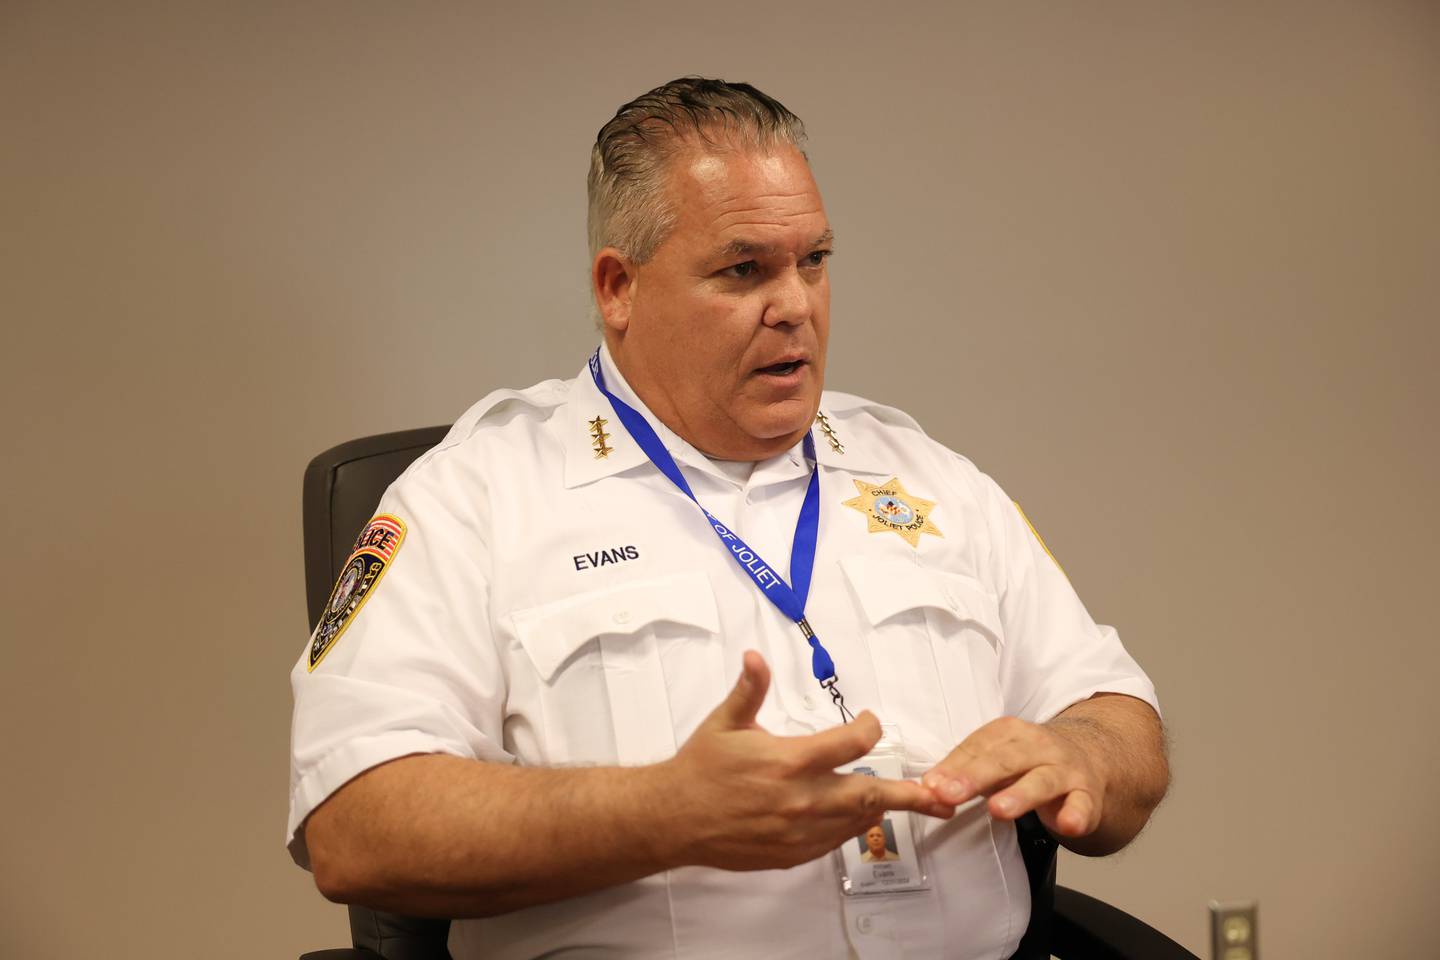 Joliet Police Chief William Evans talks about his first few months on the job as Joliet’s new police chief. Wednesday, April 13, 2022, in Joliet.